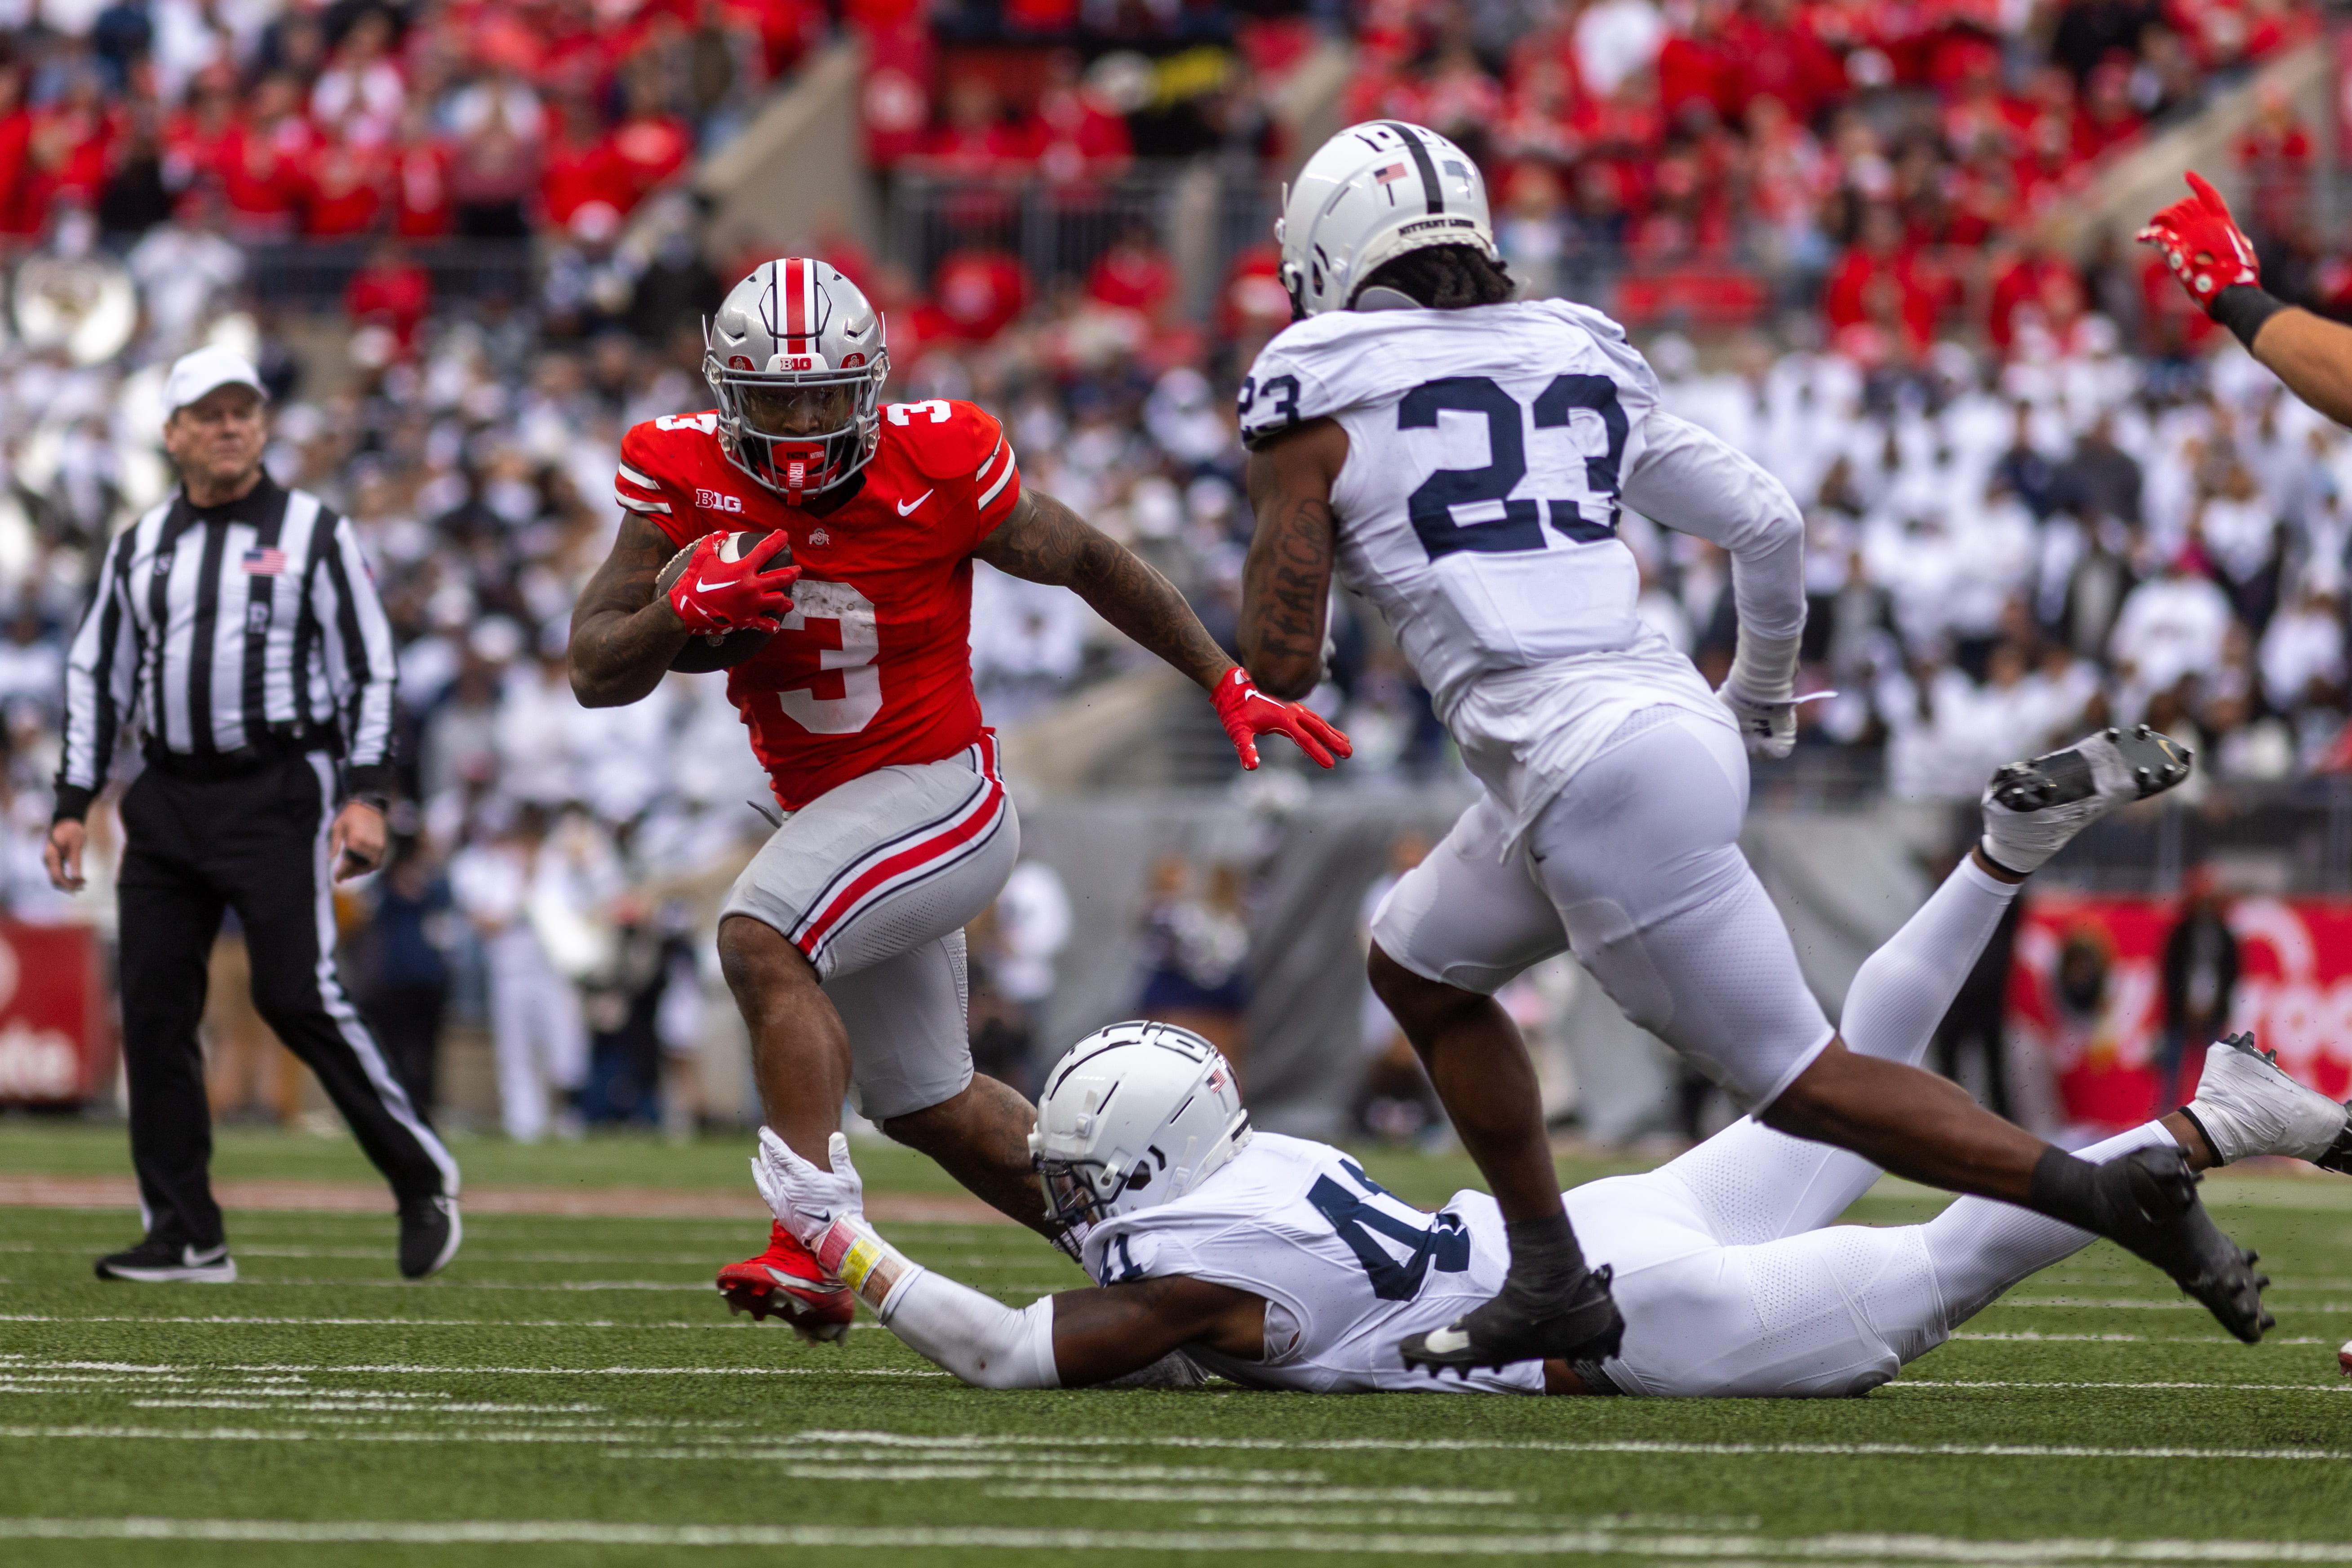 Football: Roles reversed in Ohio State’s defensive showing Saturday